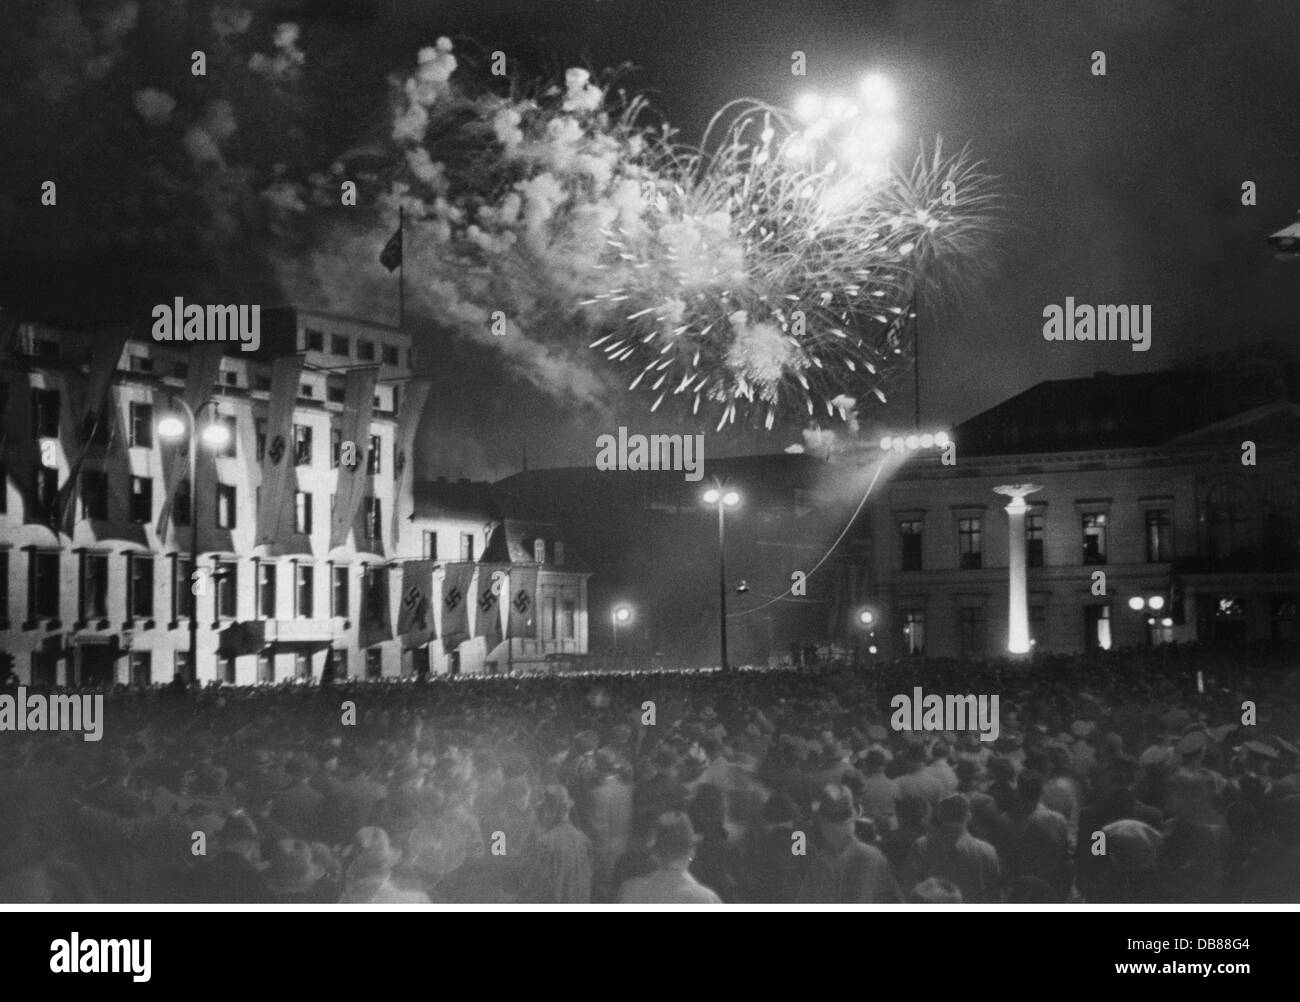 Nazism / National Socialism, politics, Axis Rome-Berlin, journey of Chancellor of the Reich Adolf Hitler to Italy, 3. - 10.5.1938, return, reception in Berlin, 10.5.1938, fireworks on Wilhelmplatz, crowd, crowds, crowds of people, axis Rome - Berlin, people, state visit, state visits, Germany, German Reich, Third Reich, 1930s, 30s, 20th century, politics, policy, historic, historical, Additional-Rights-Clearences-Not Available Stock Photo